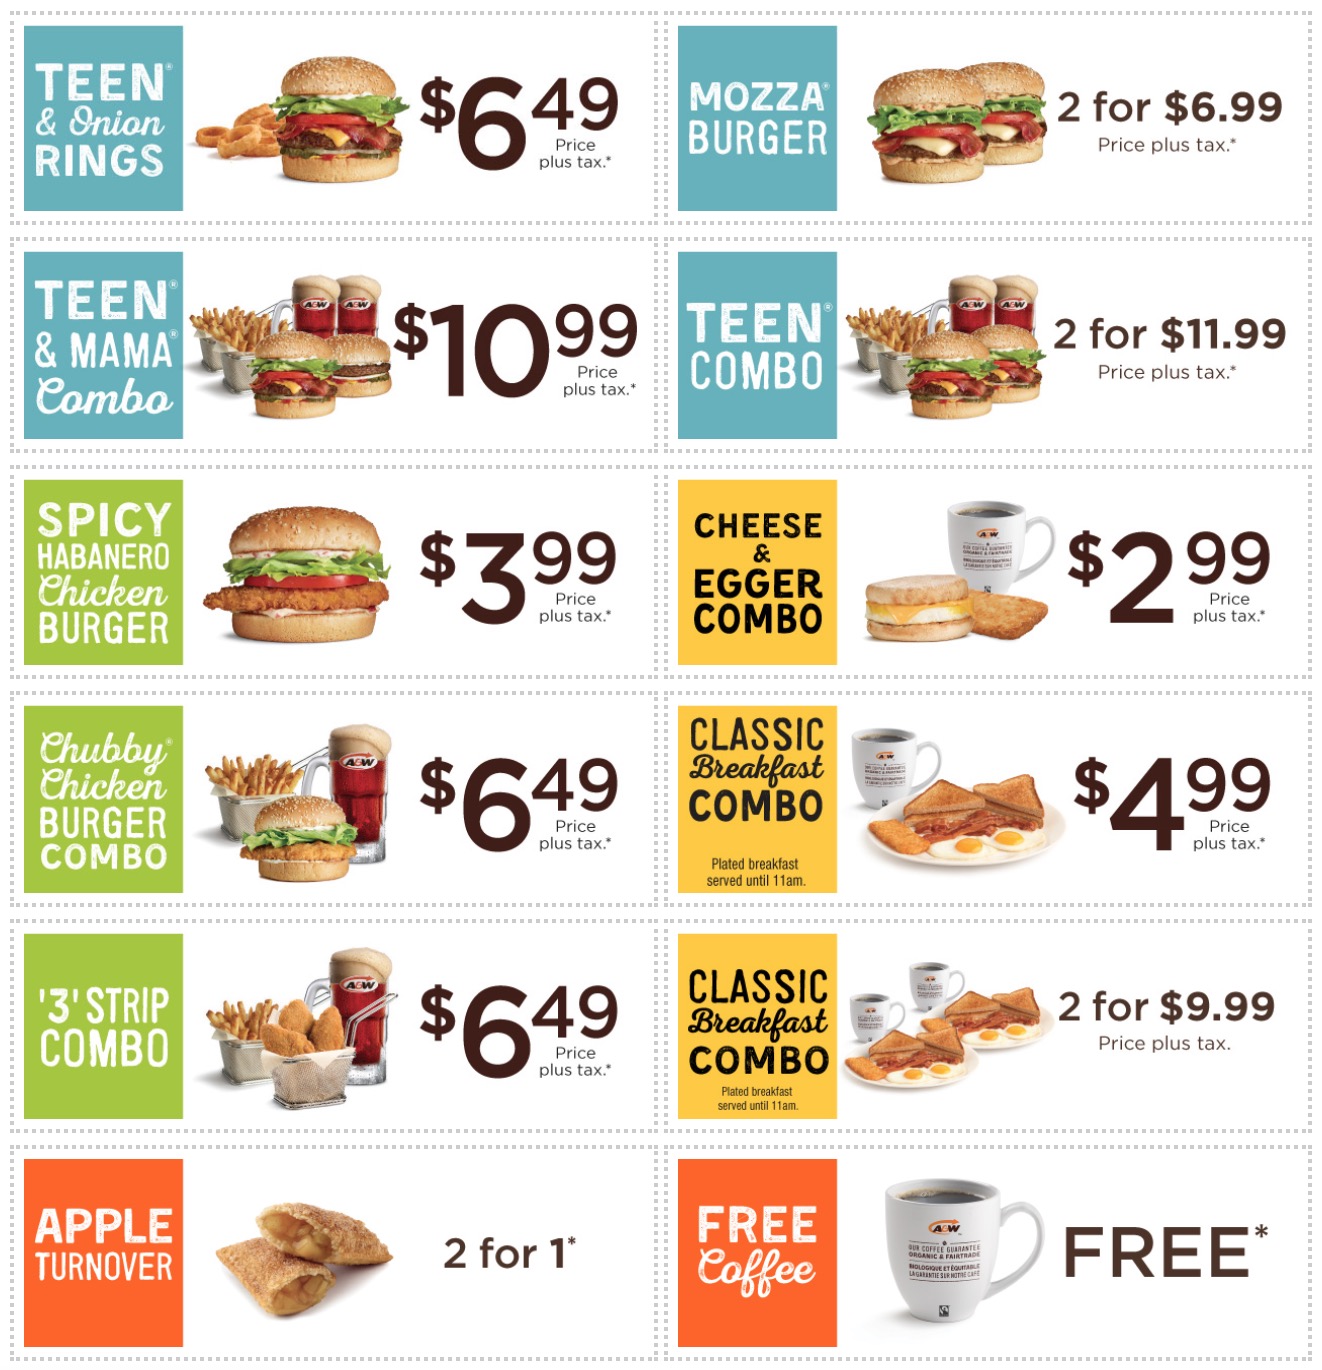 A&W Canada Coupons FREE Coffee, BOGO FREE Apple Turnovers, Spicy